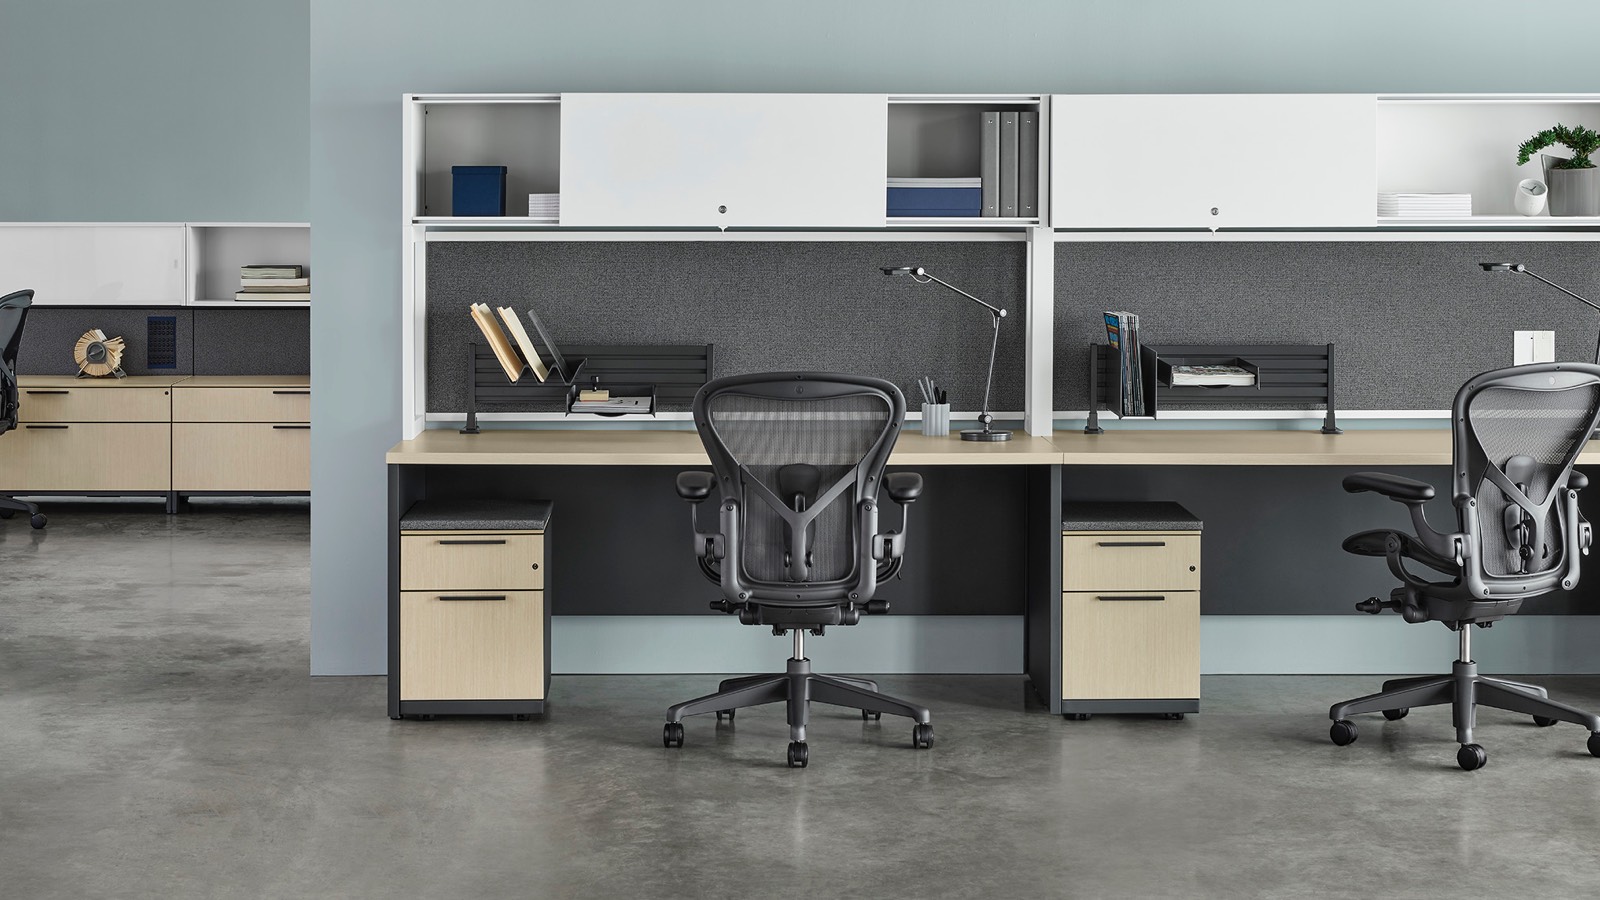 https://www.hermanmiller.com/content/dam/hmicom/page_assets/home/image_text/it_home_government_20191106.jpg